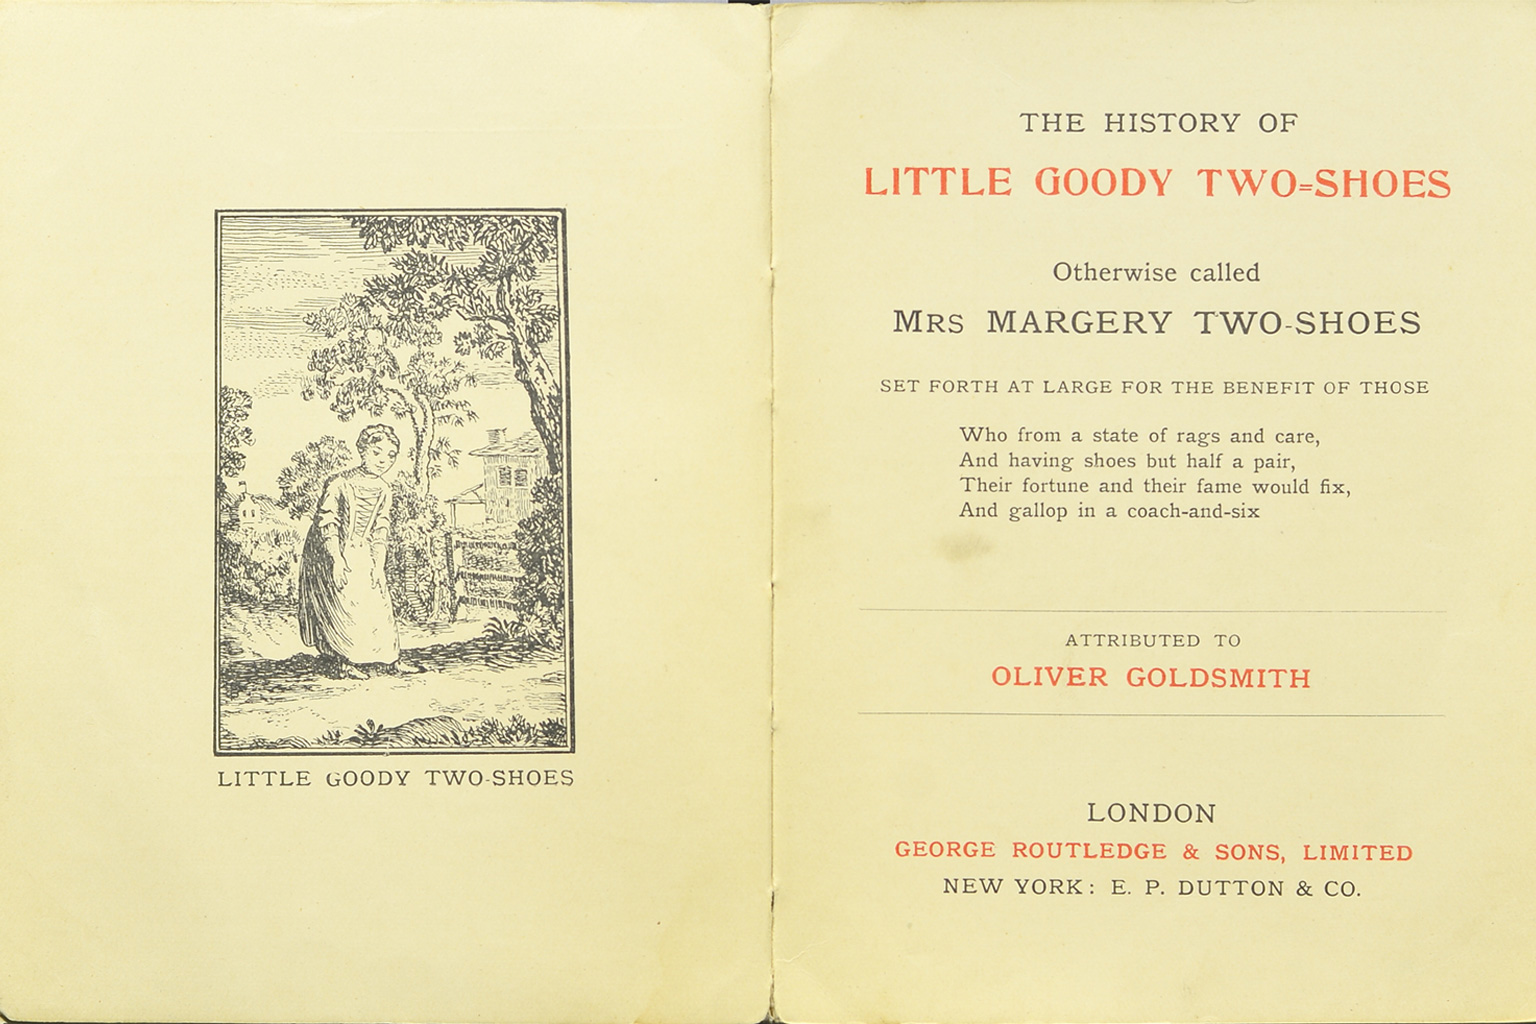 Exhibit Materials of The history of little Goody Two-Shoes, otherwise called Mrs Margery Two-Shoes